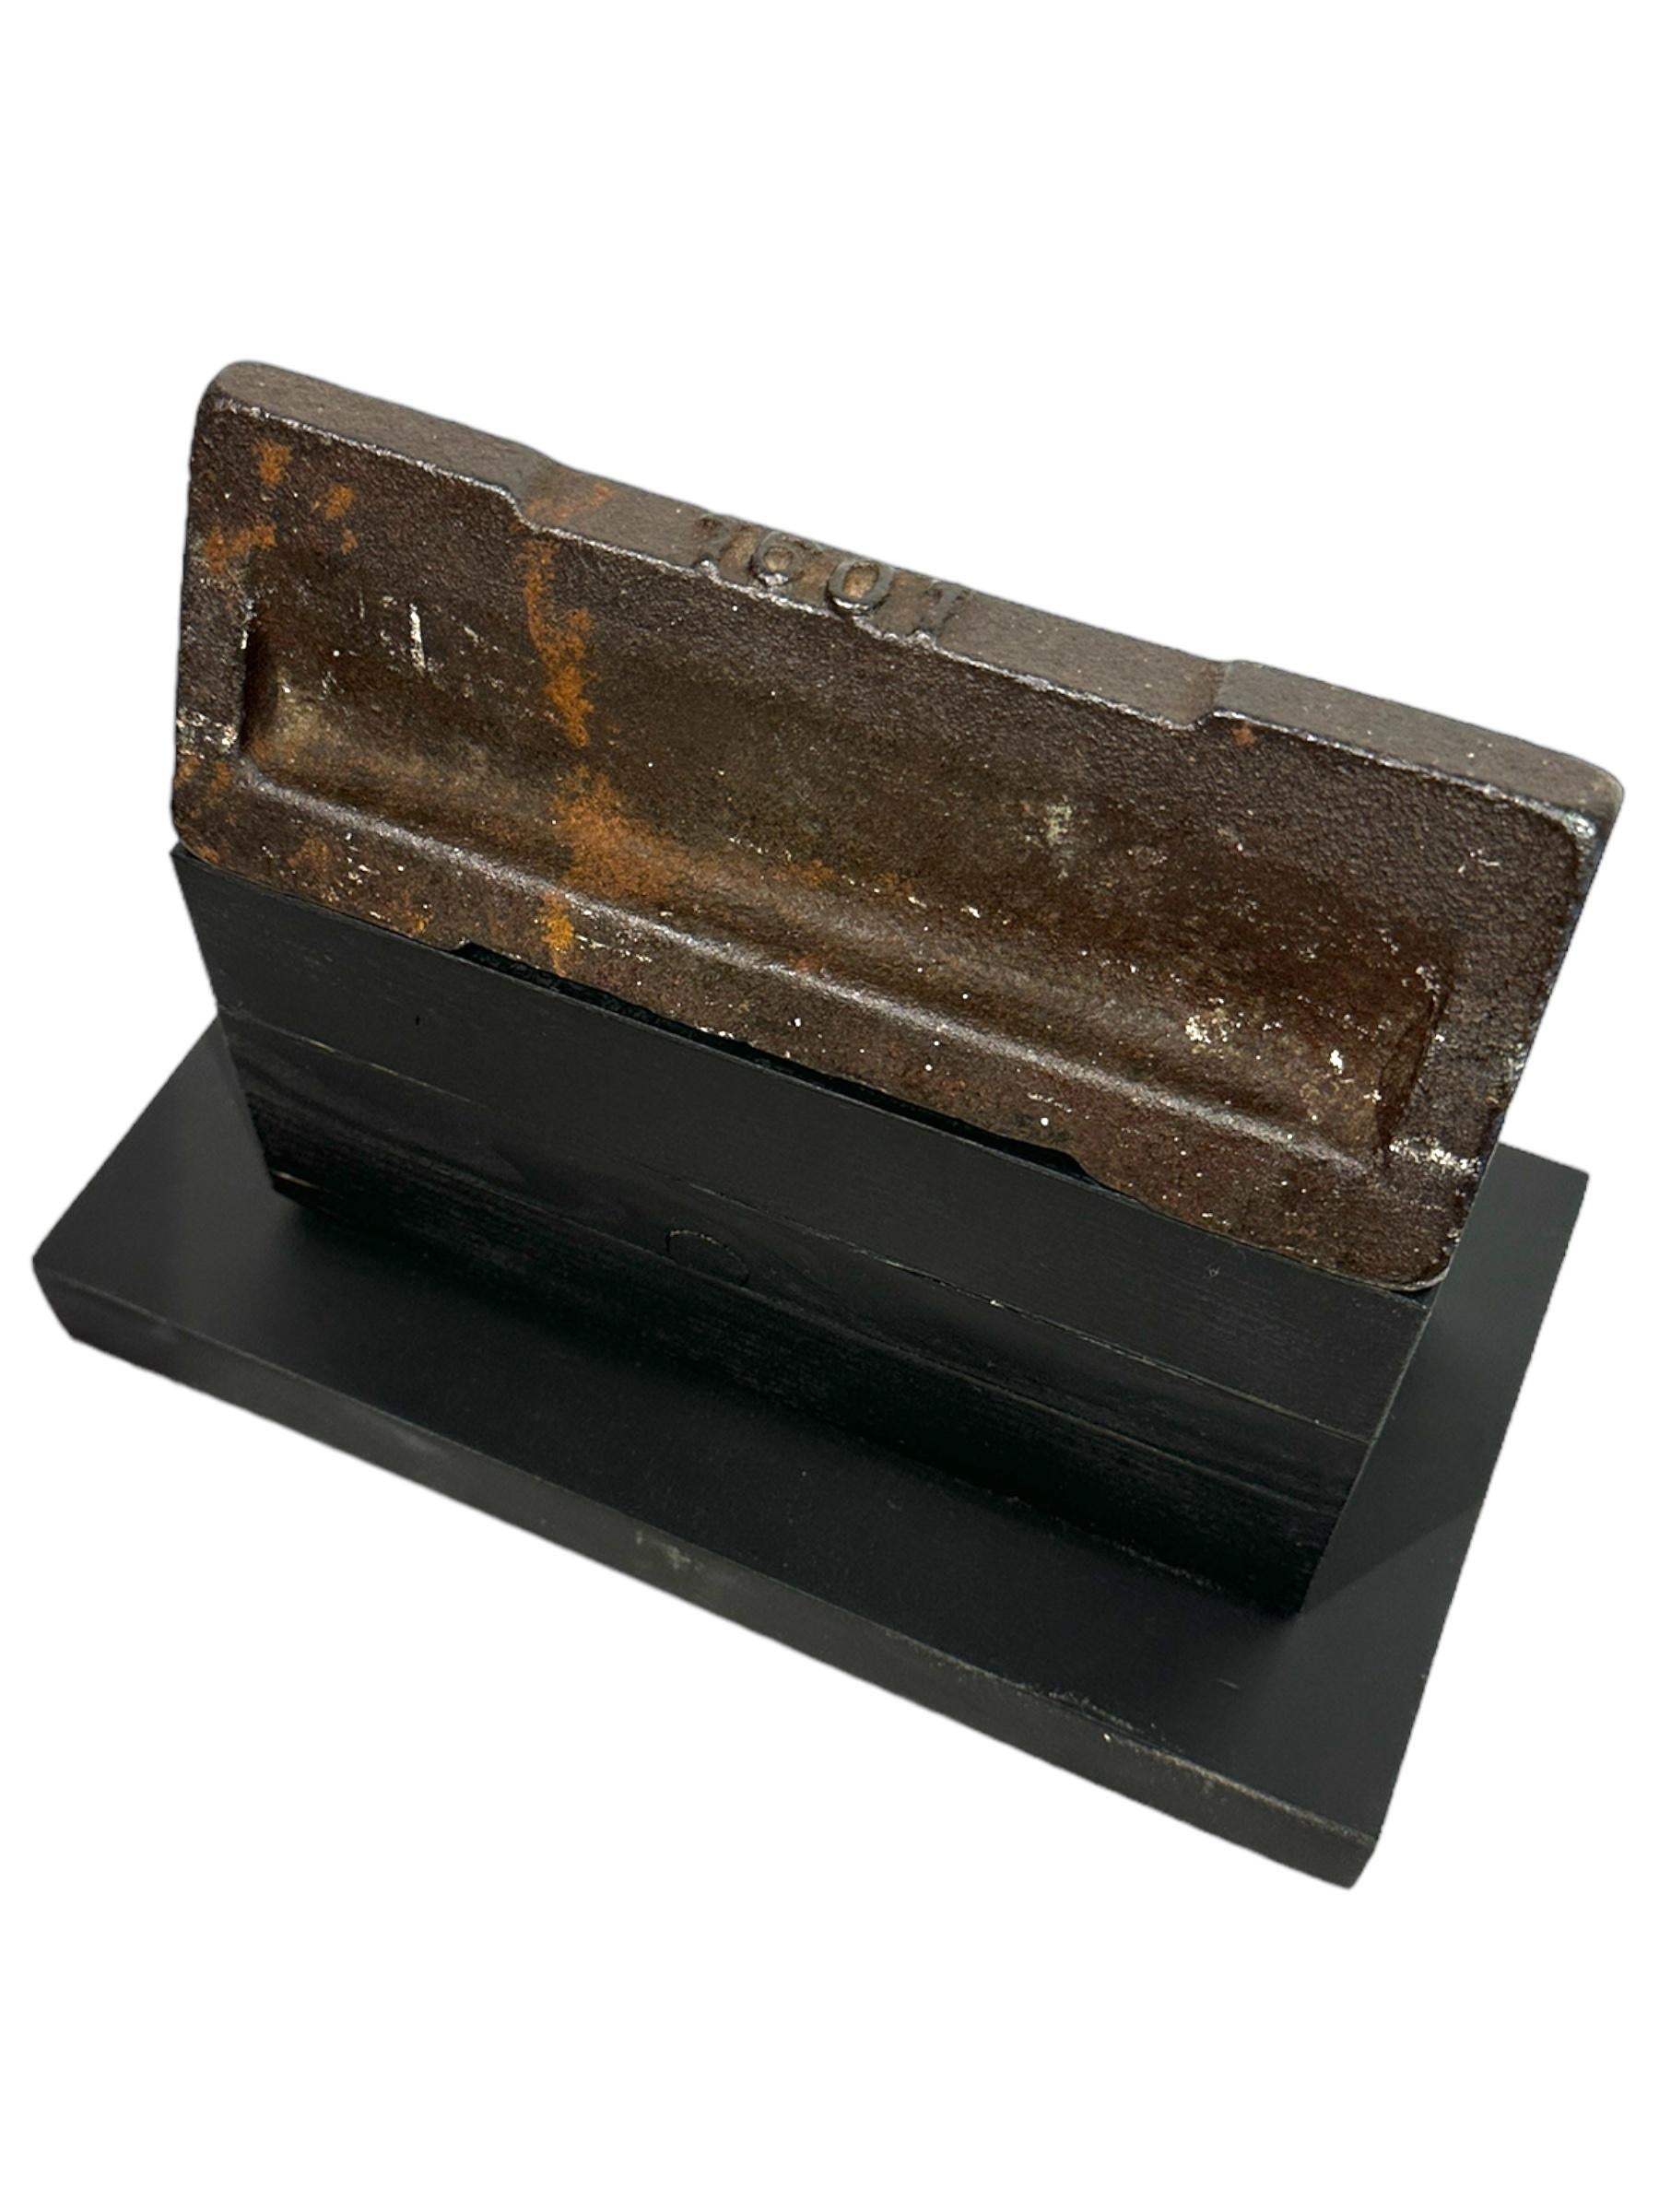 American House Sculpture, Minimalist Modern Structure, Rusted Steel Wedge on Wood Blocks For Sale